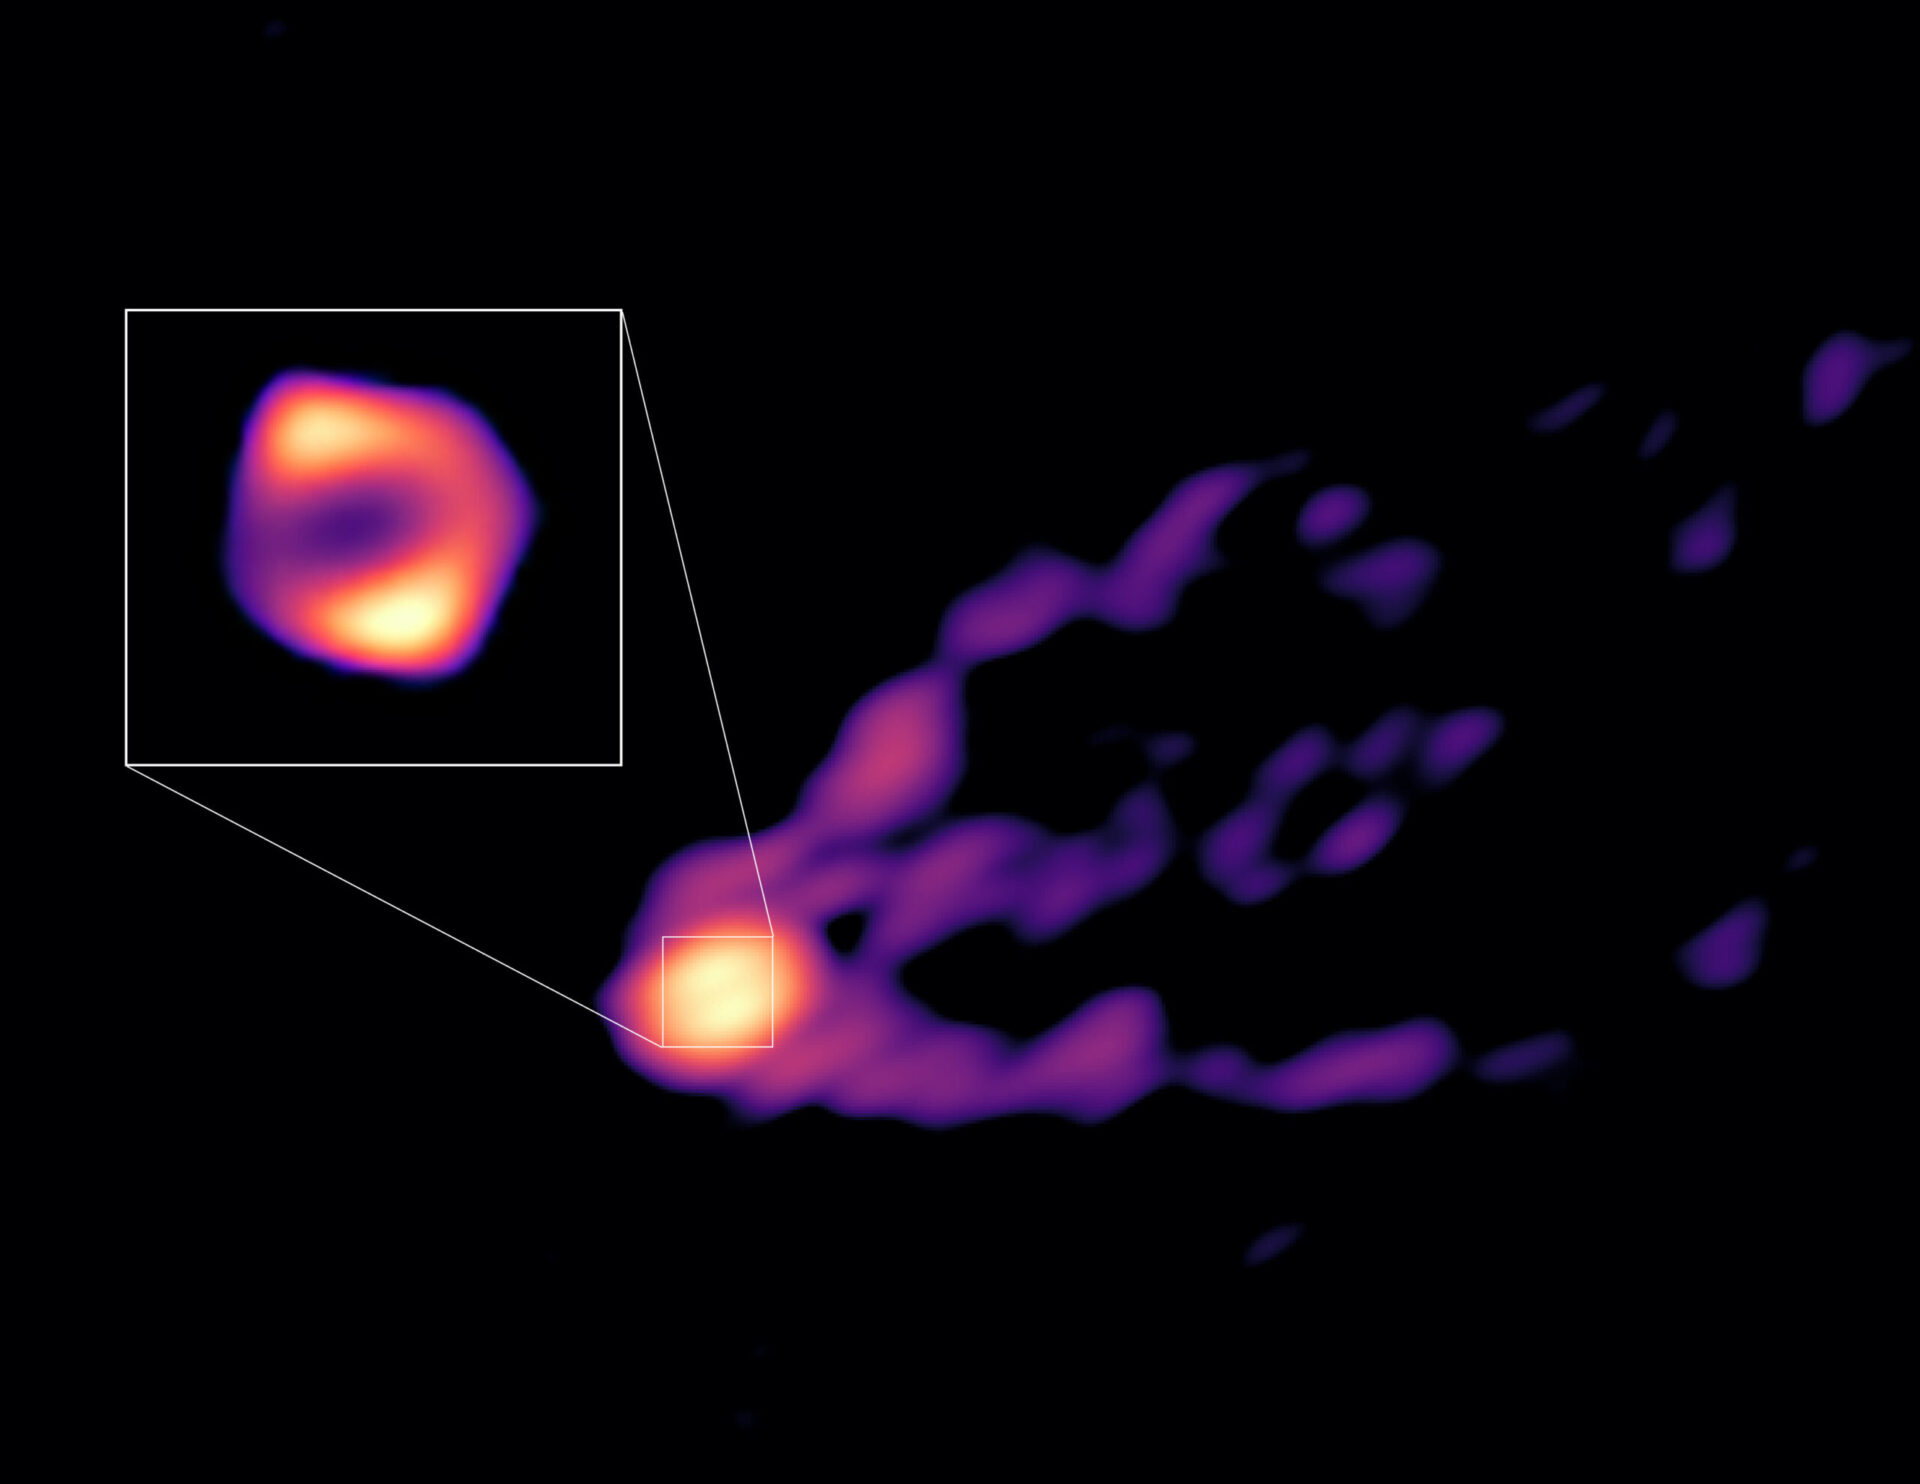 This image shows the jet and shadow of the black hole at the centre of the M87 galaxy together for the first time. The observations were obtained with telescopes from the Global Millimetre VLBI Array (GMVA), the Atacama Large Millimeter/submillimeter Array (ALMA), and the Greenland Telescope. This image gives scientists the context needed to understand how the powerful jet is formed. The new observations also revealed that the black hole’s ring, shown here in the inset, is 50% larger than the ring observed at shorter radio wavelengths by the Event Horizon Telescope (EHT). This suggests that in the new image we see more of the material that is falling towards the black hole than what we could see with the EHT. Credit: R.-S. Lu (SHAO), E. Ros (MPIfR), S. Dagnello (NRAO/AUI/NSF)